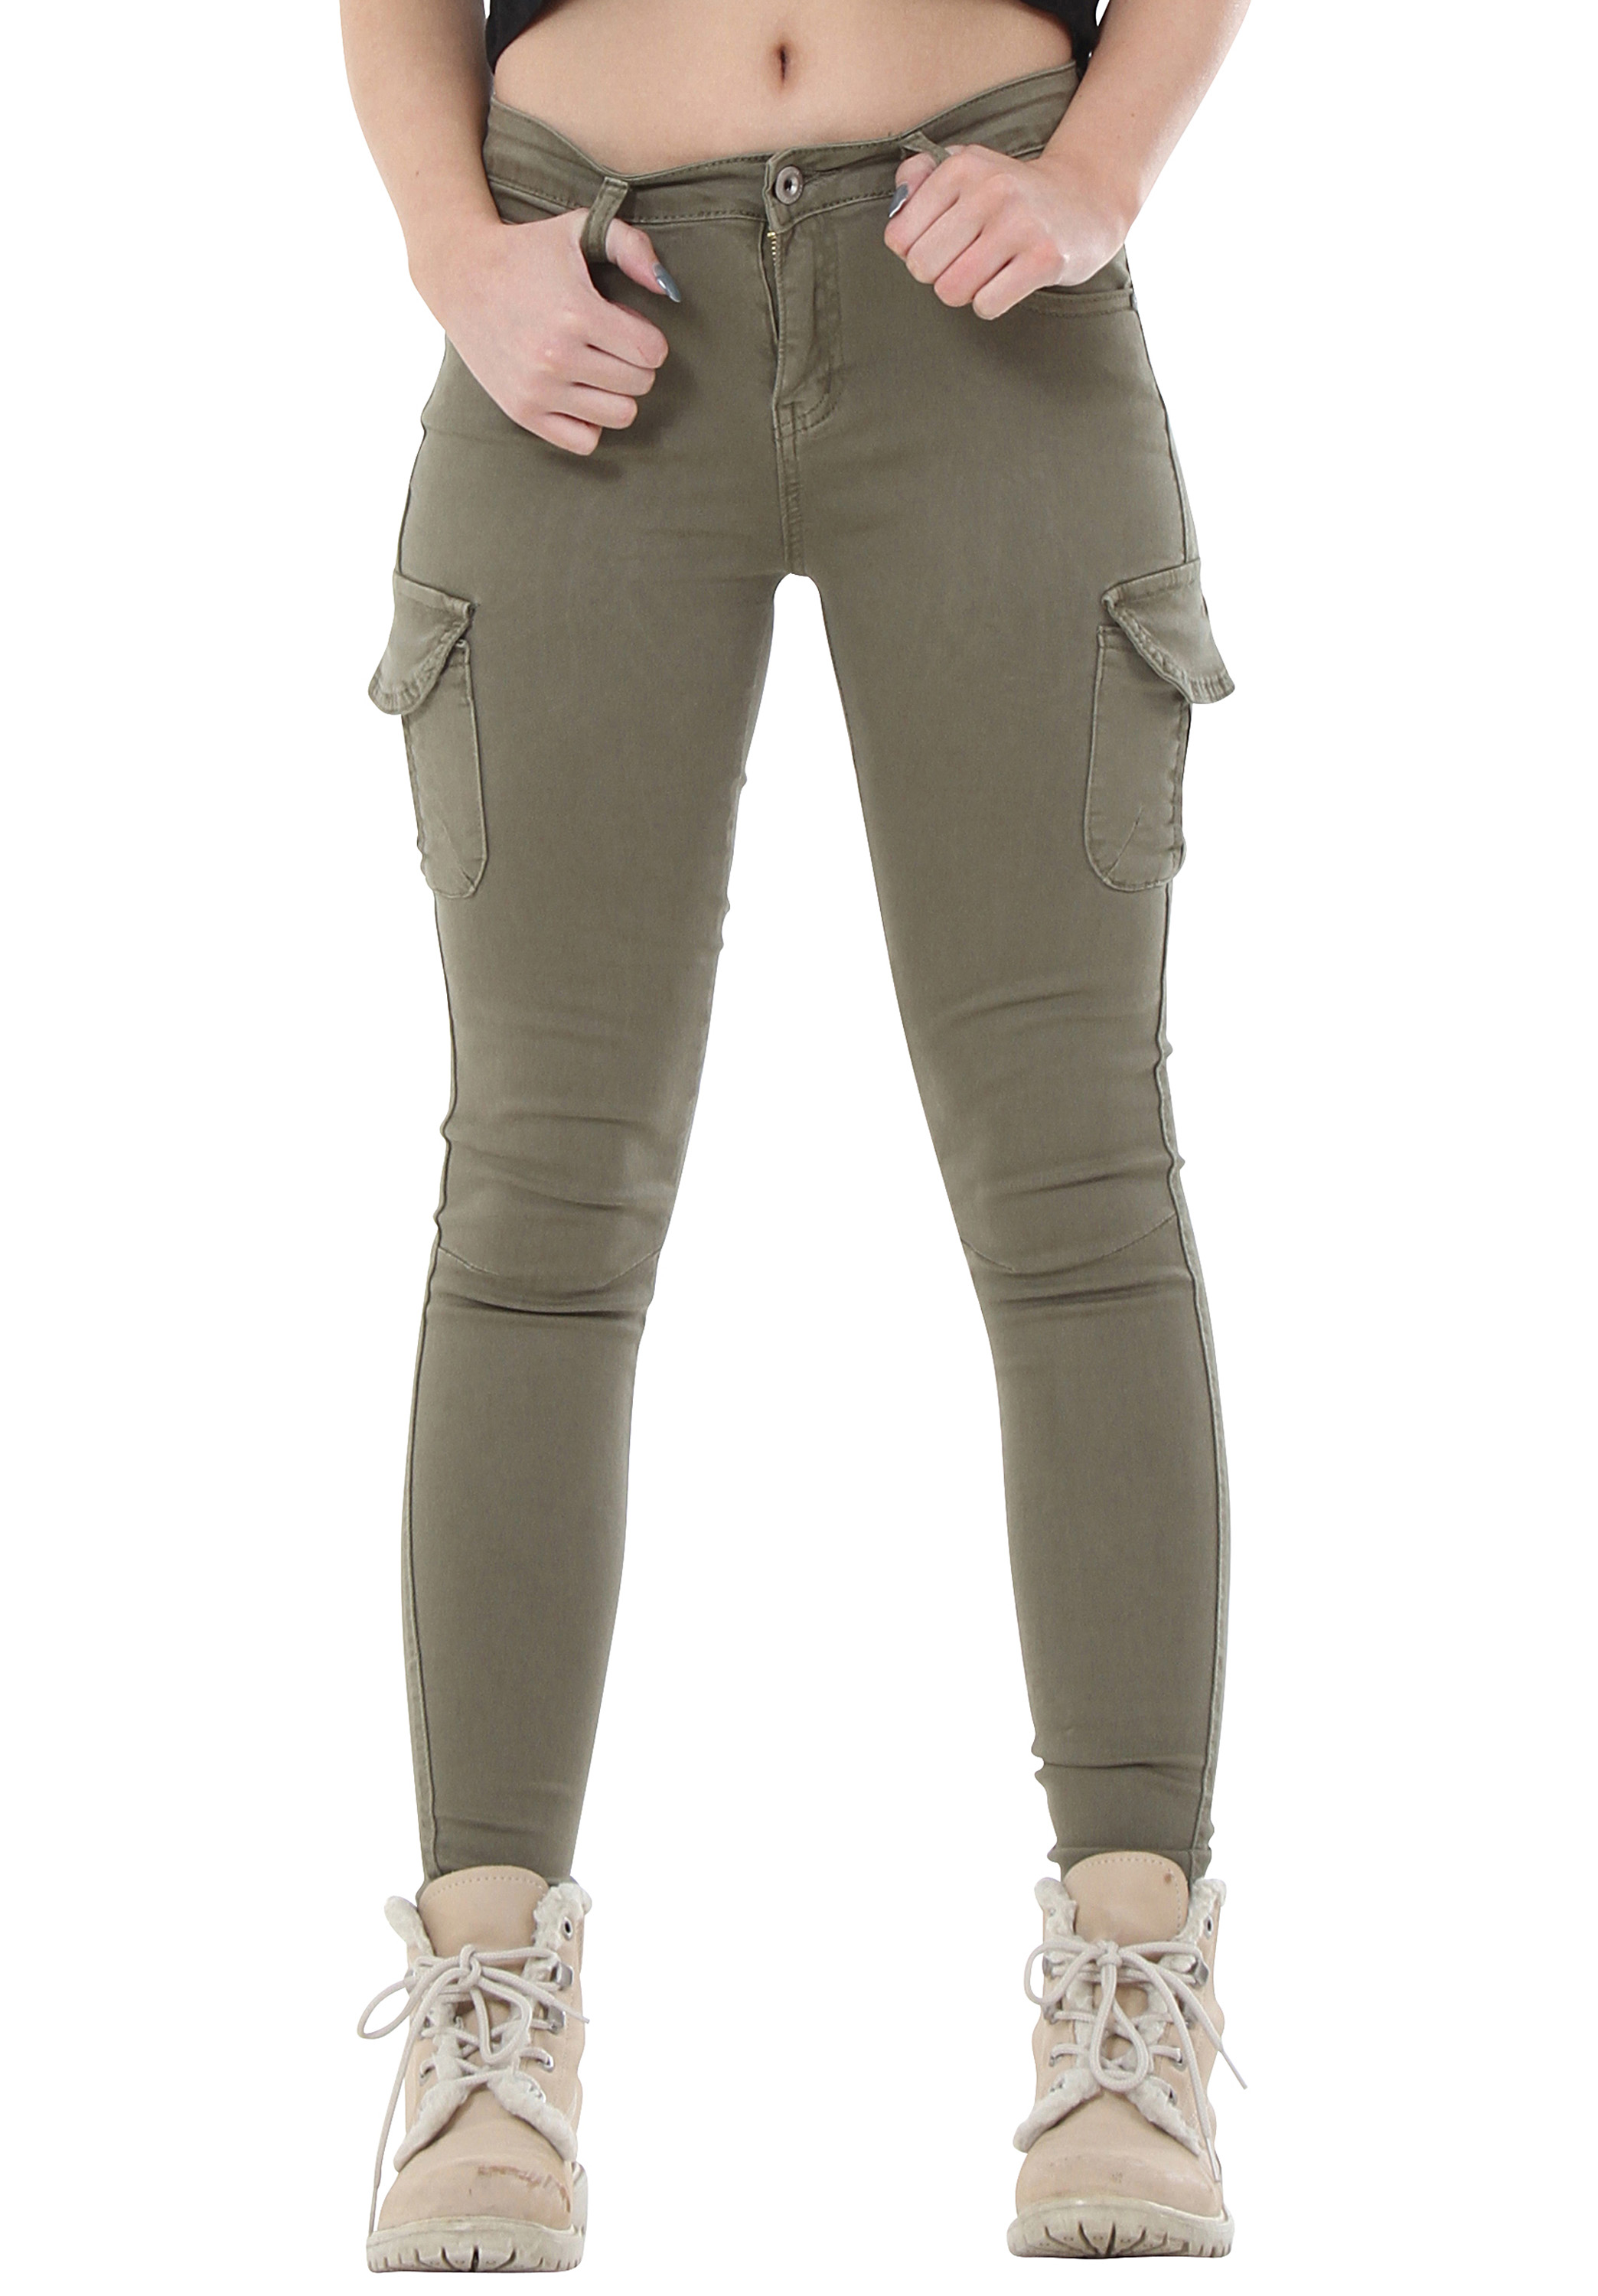 New Womens Army Green Slim Skinny Stretch Combat Trousers Cargo Pants ...